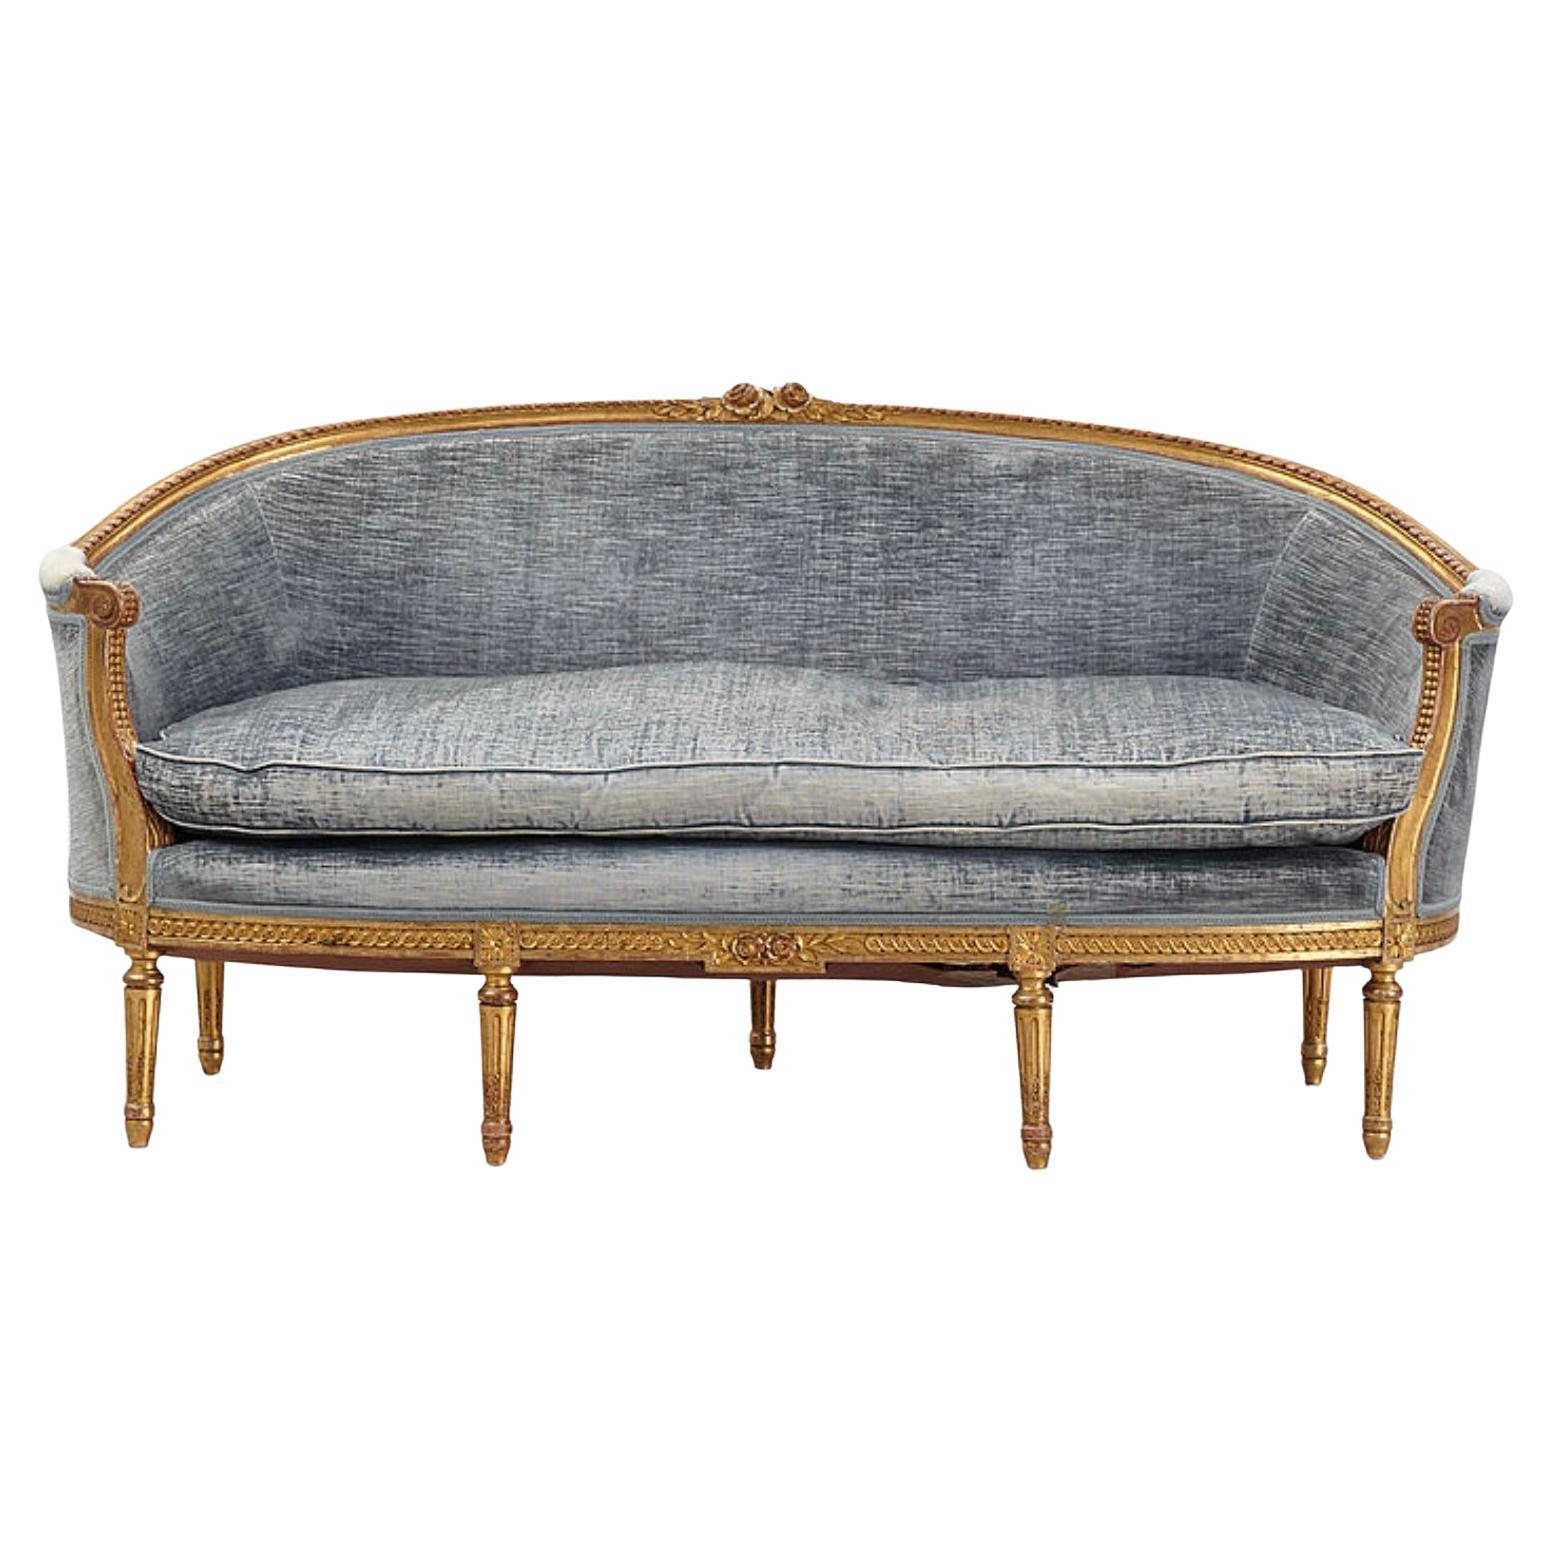 1900s Swedish Two-Seater Gustavian Style Gilt Velvet Sofa with Carved Decoration For Sale